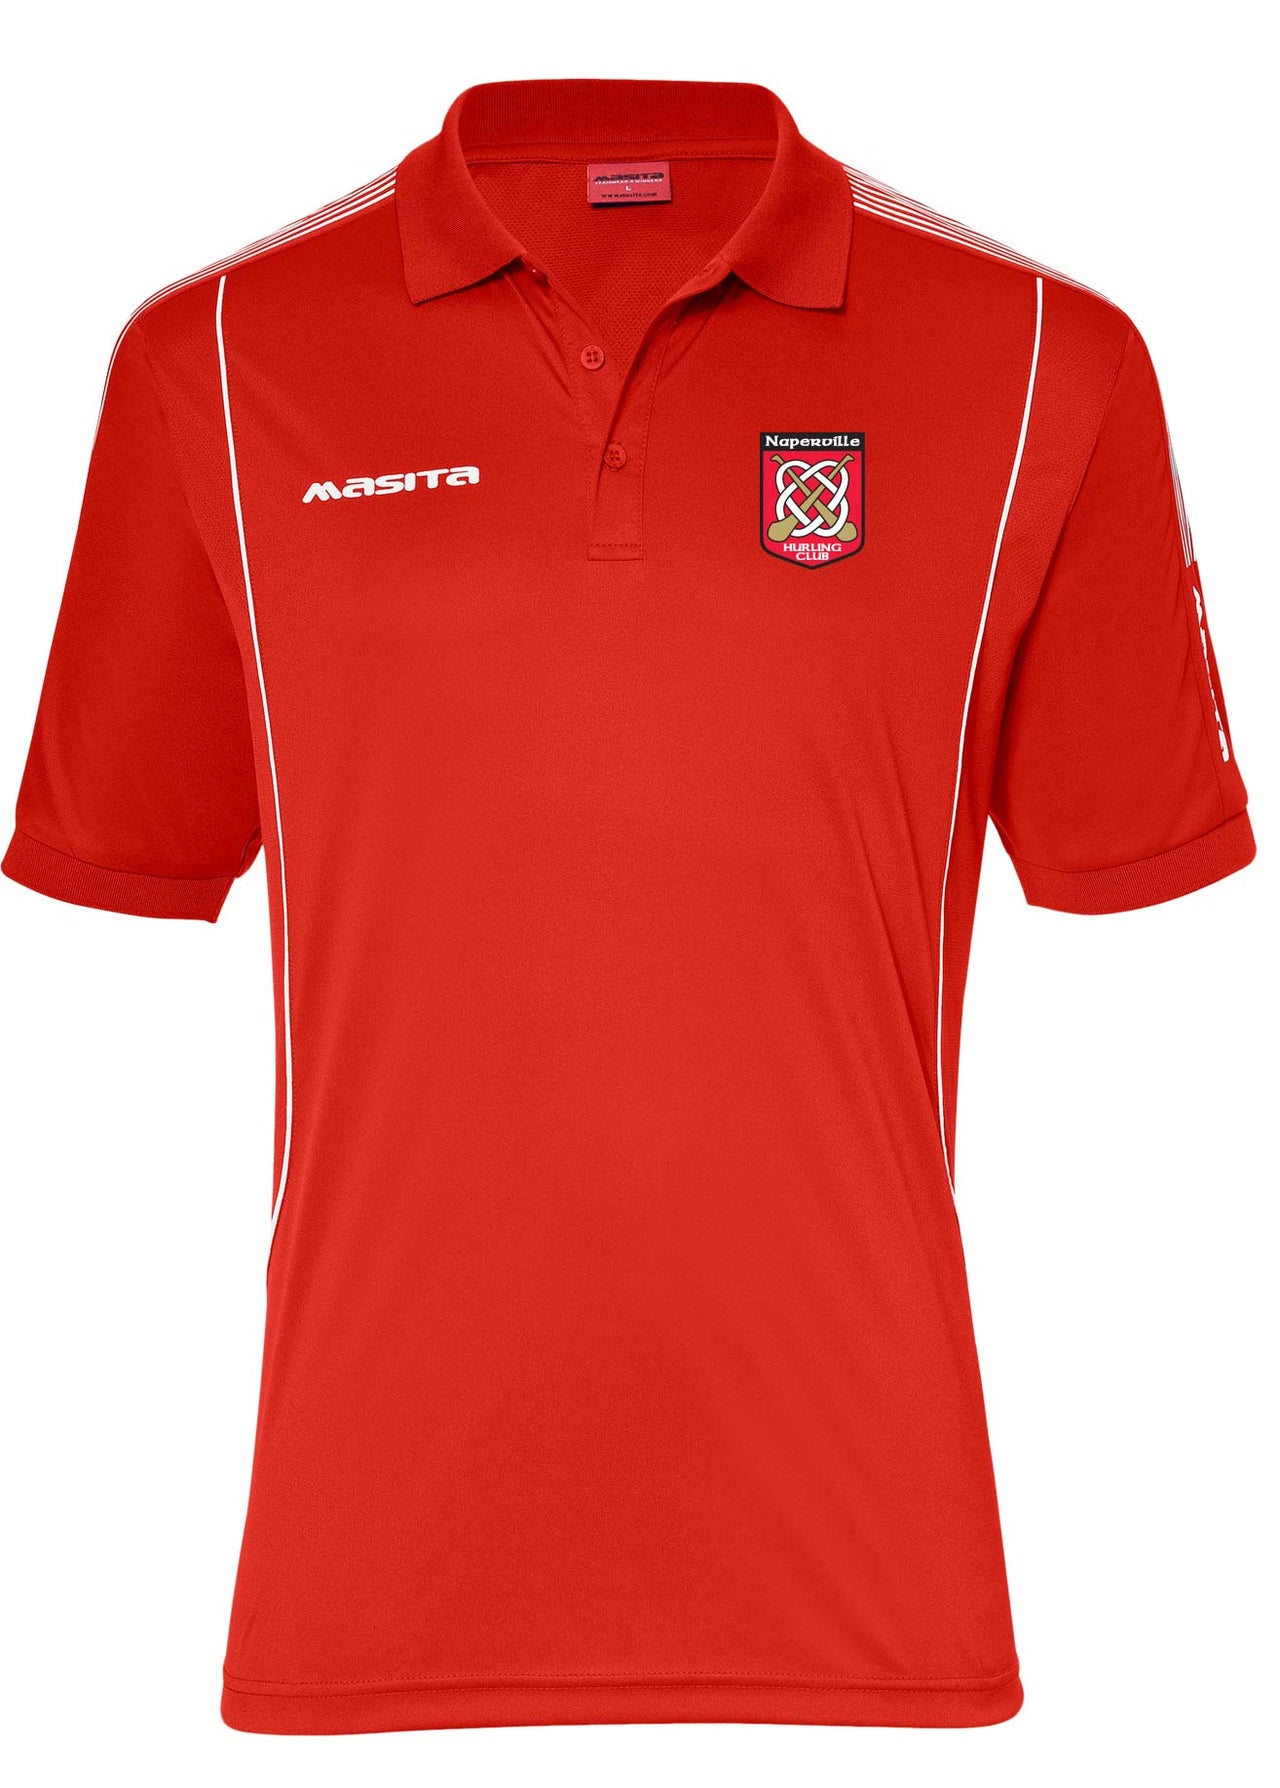 Naperville HC Barca Polo Adult